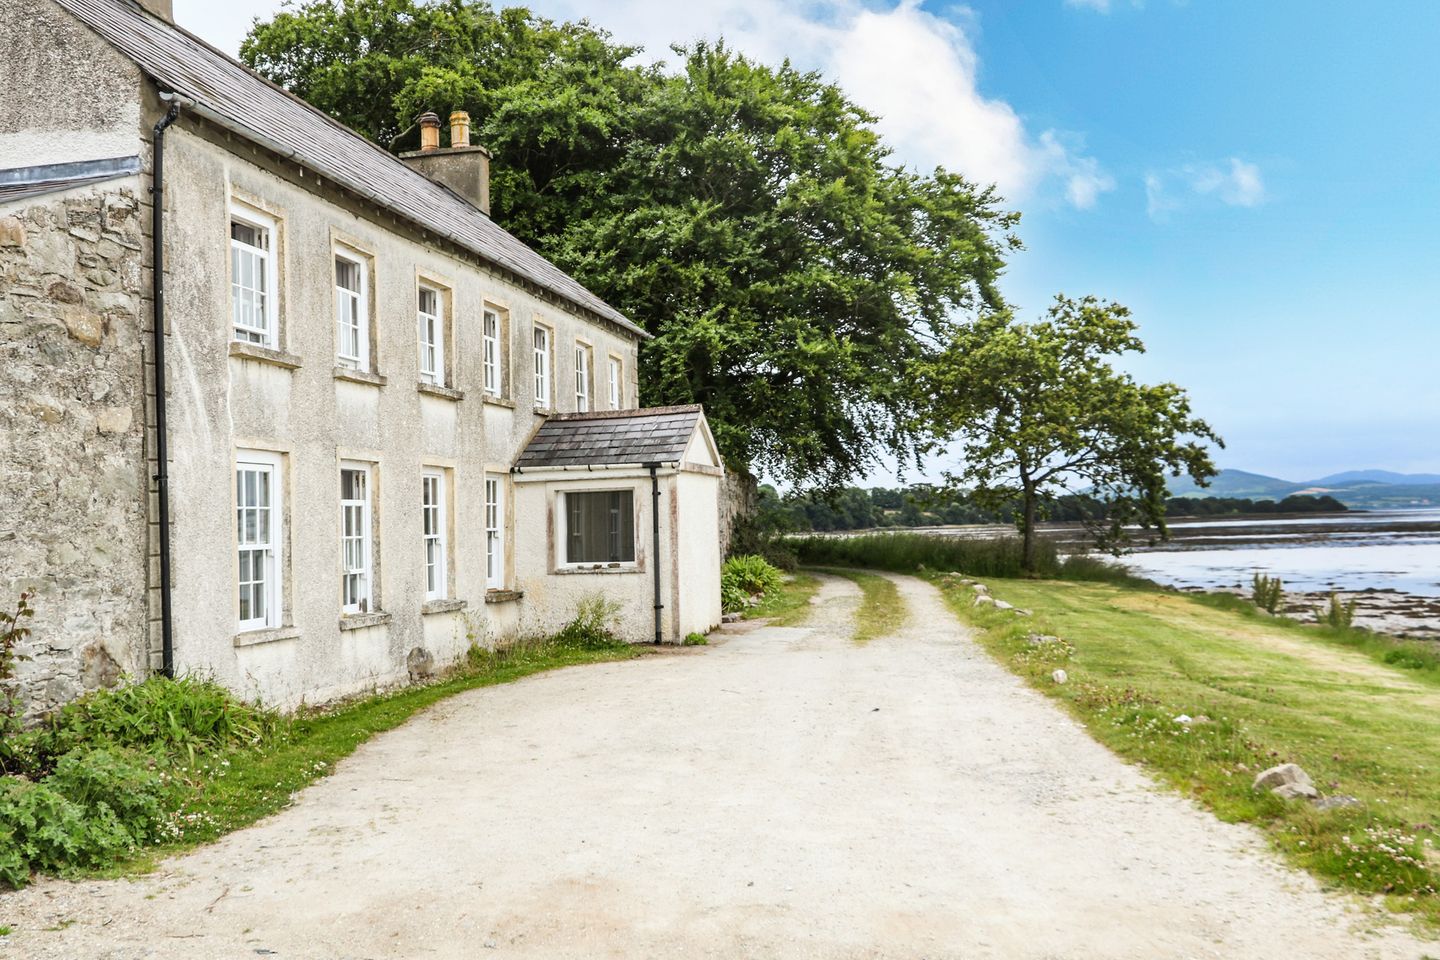 Ref. 1074125 The Ferry House, Ferry House, Fort St, Ramelton, Co. Donegal